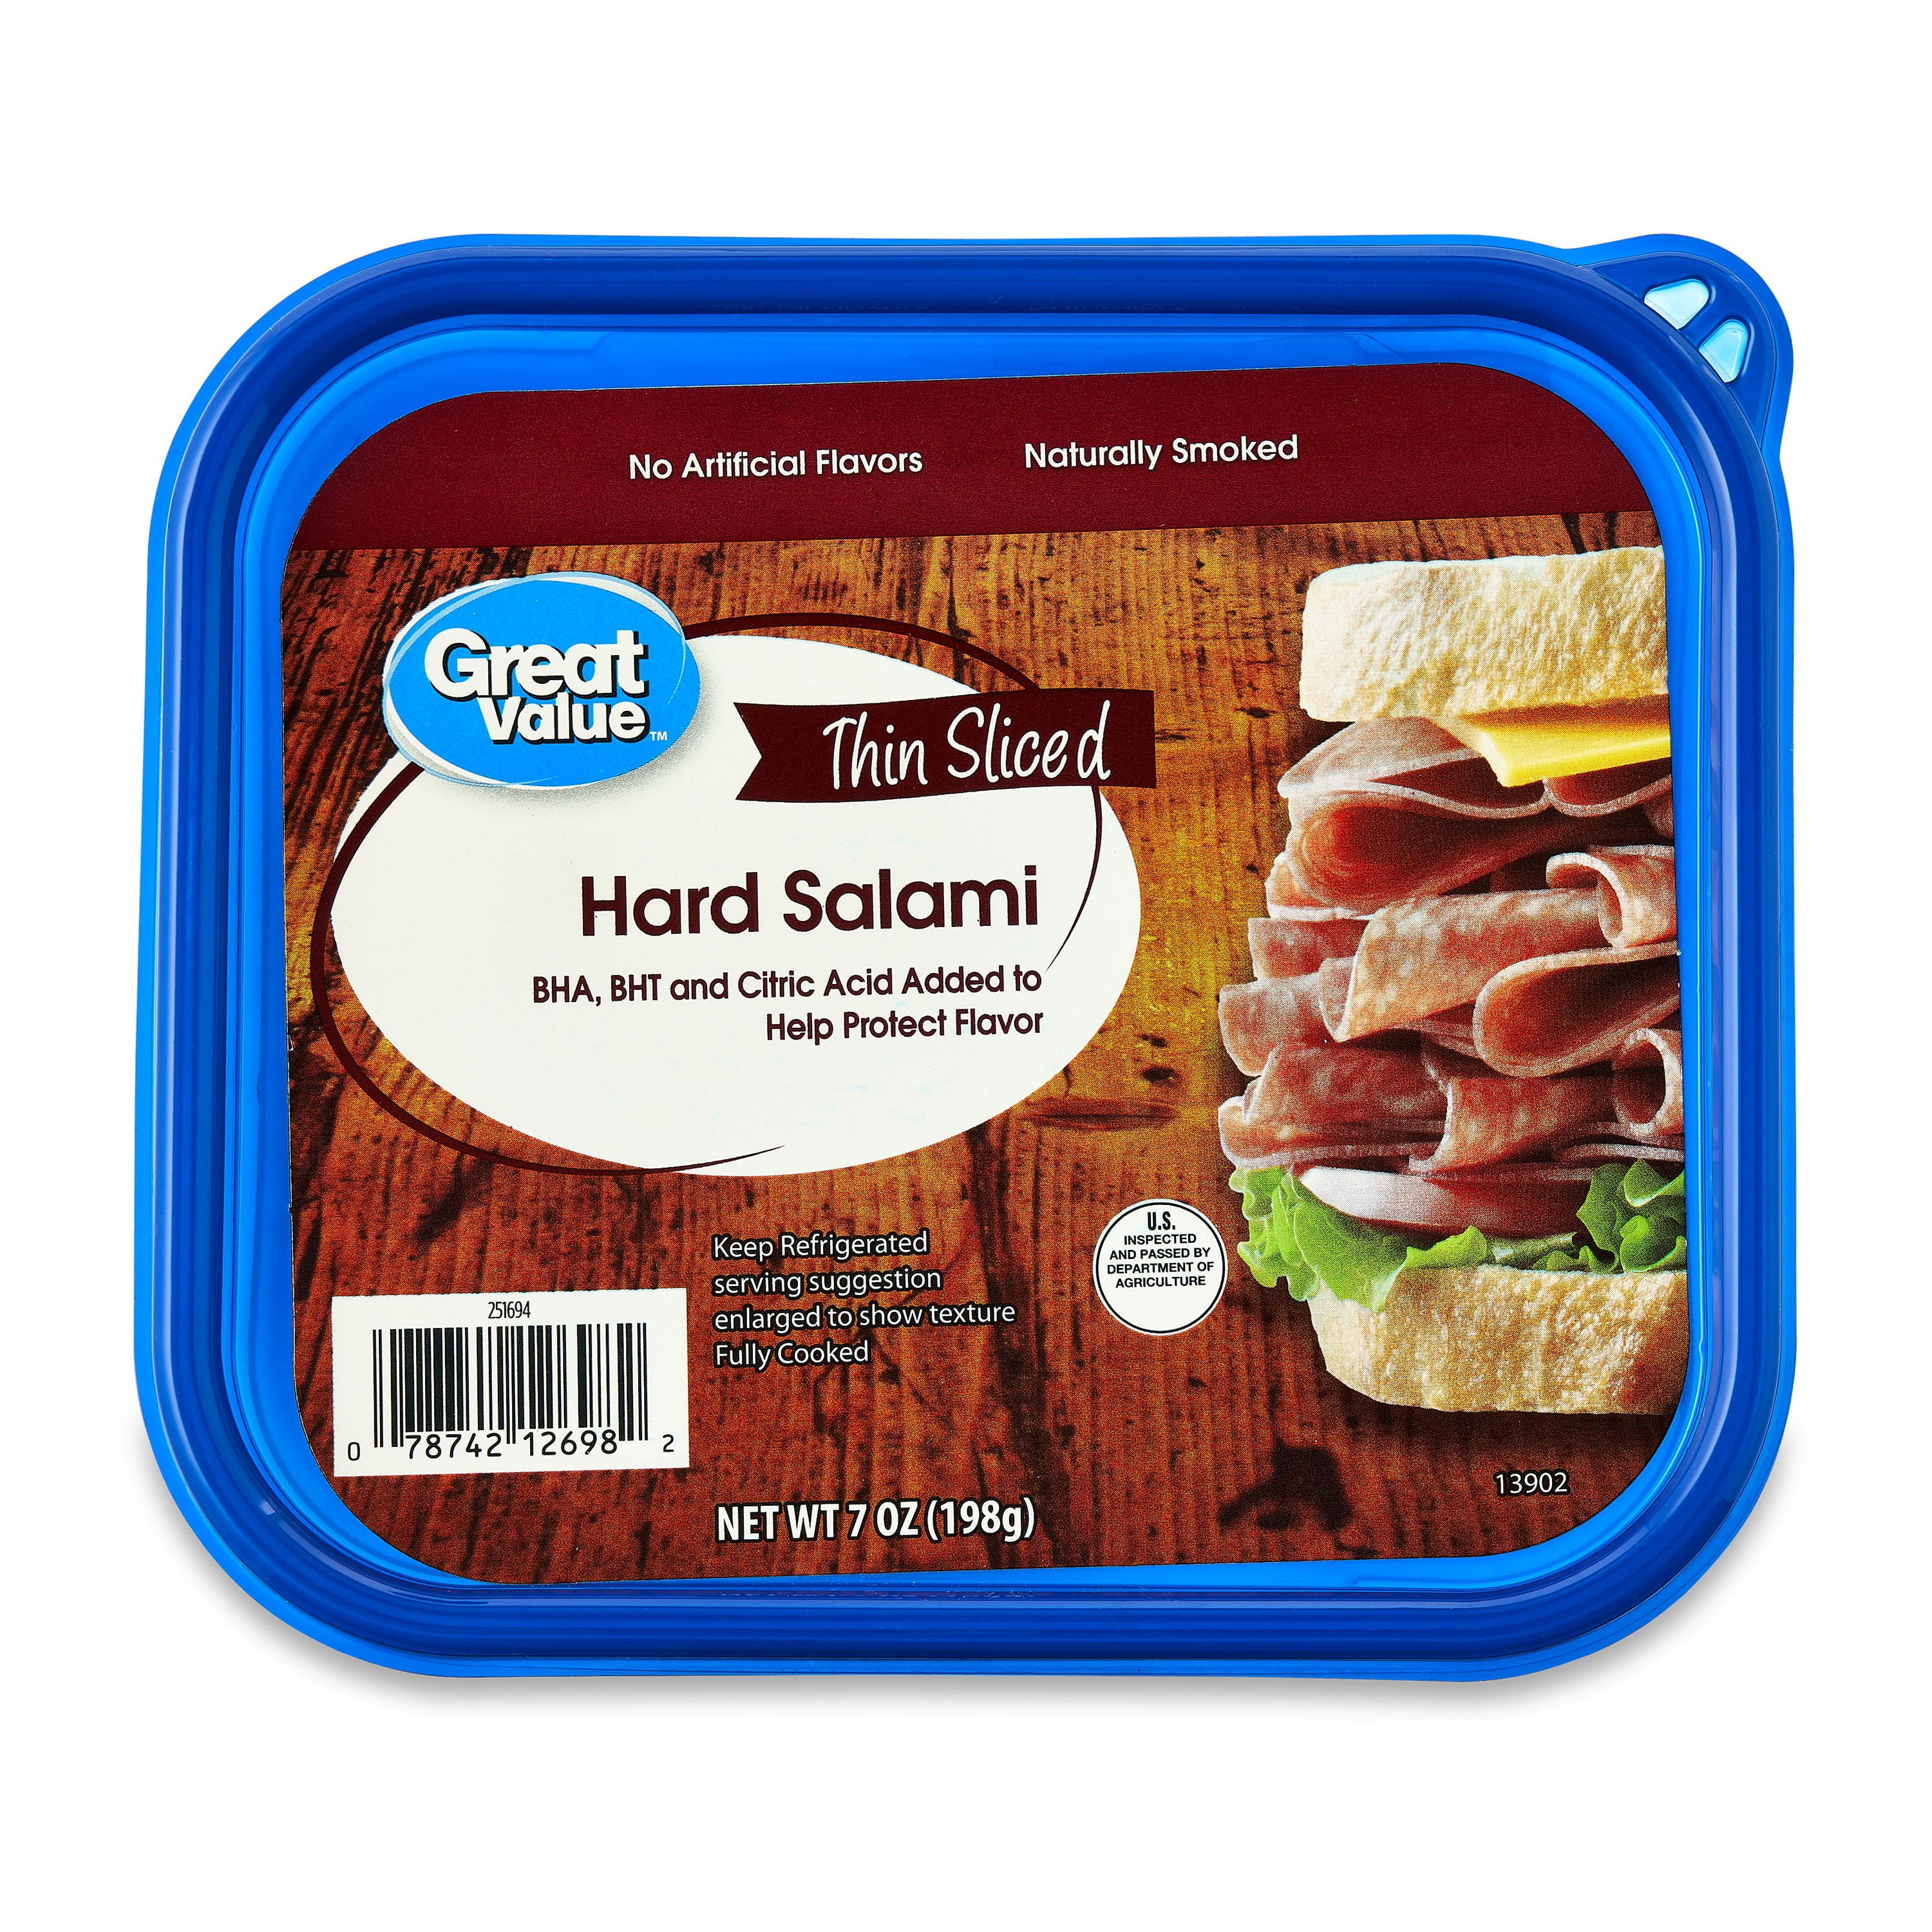 Great Value ,Thin Sliced, Hard Salami Lunchmeat, 7 oz